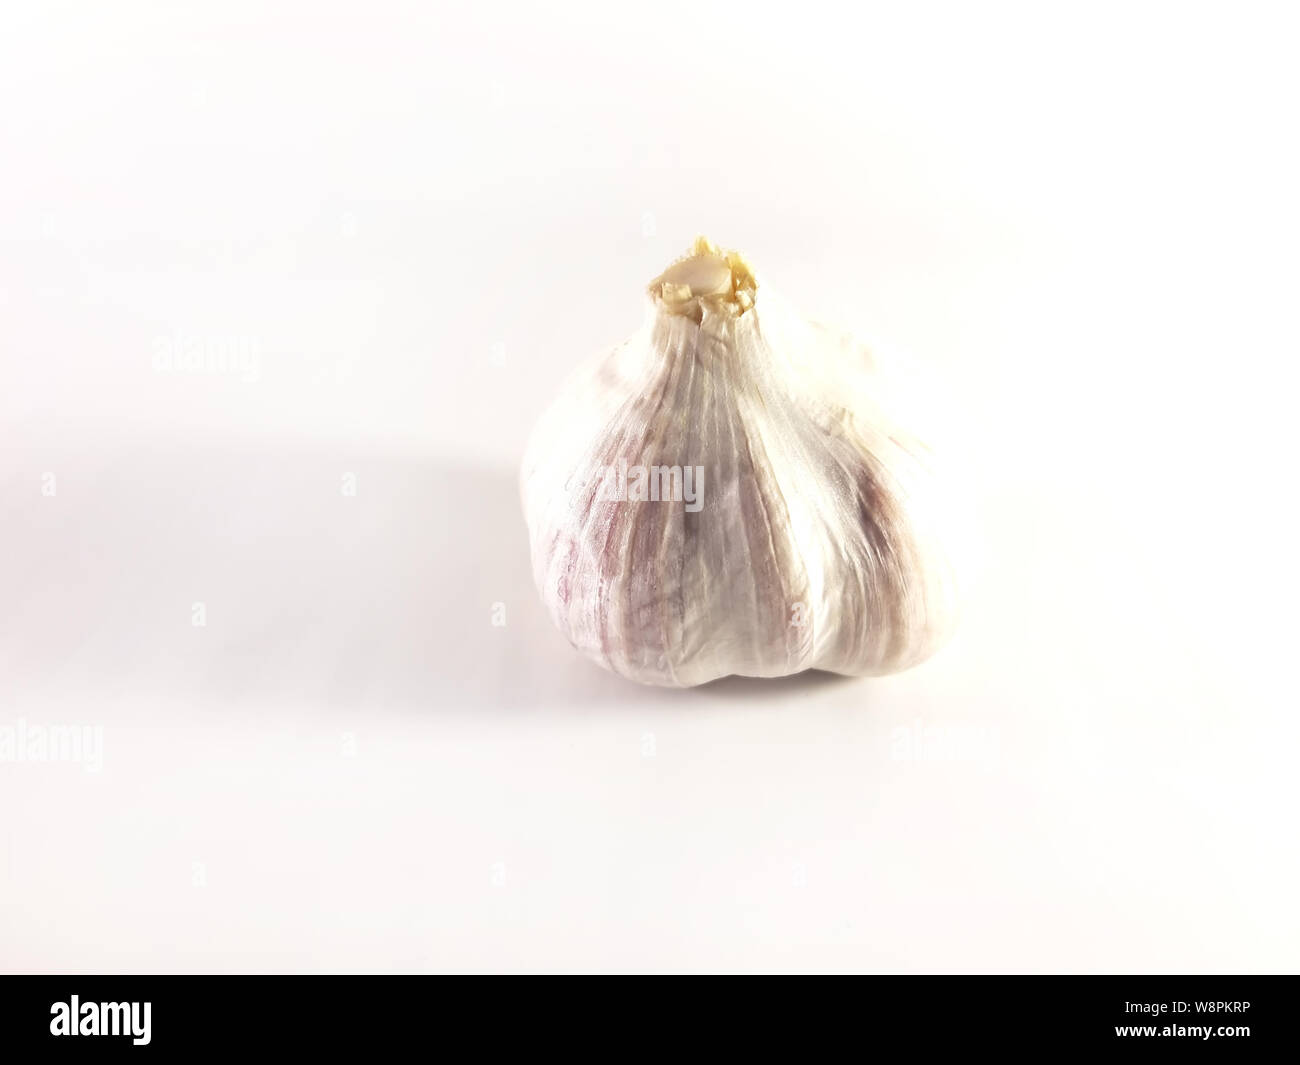 Garlic isolated, great design for any purposes. White design background. Vegetarian food. Aromatic condiment Stock Photo